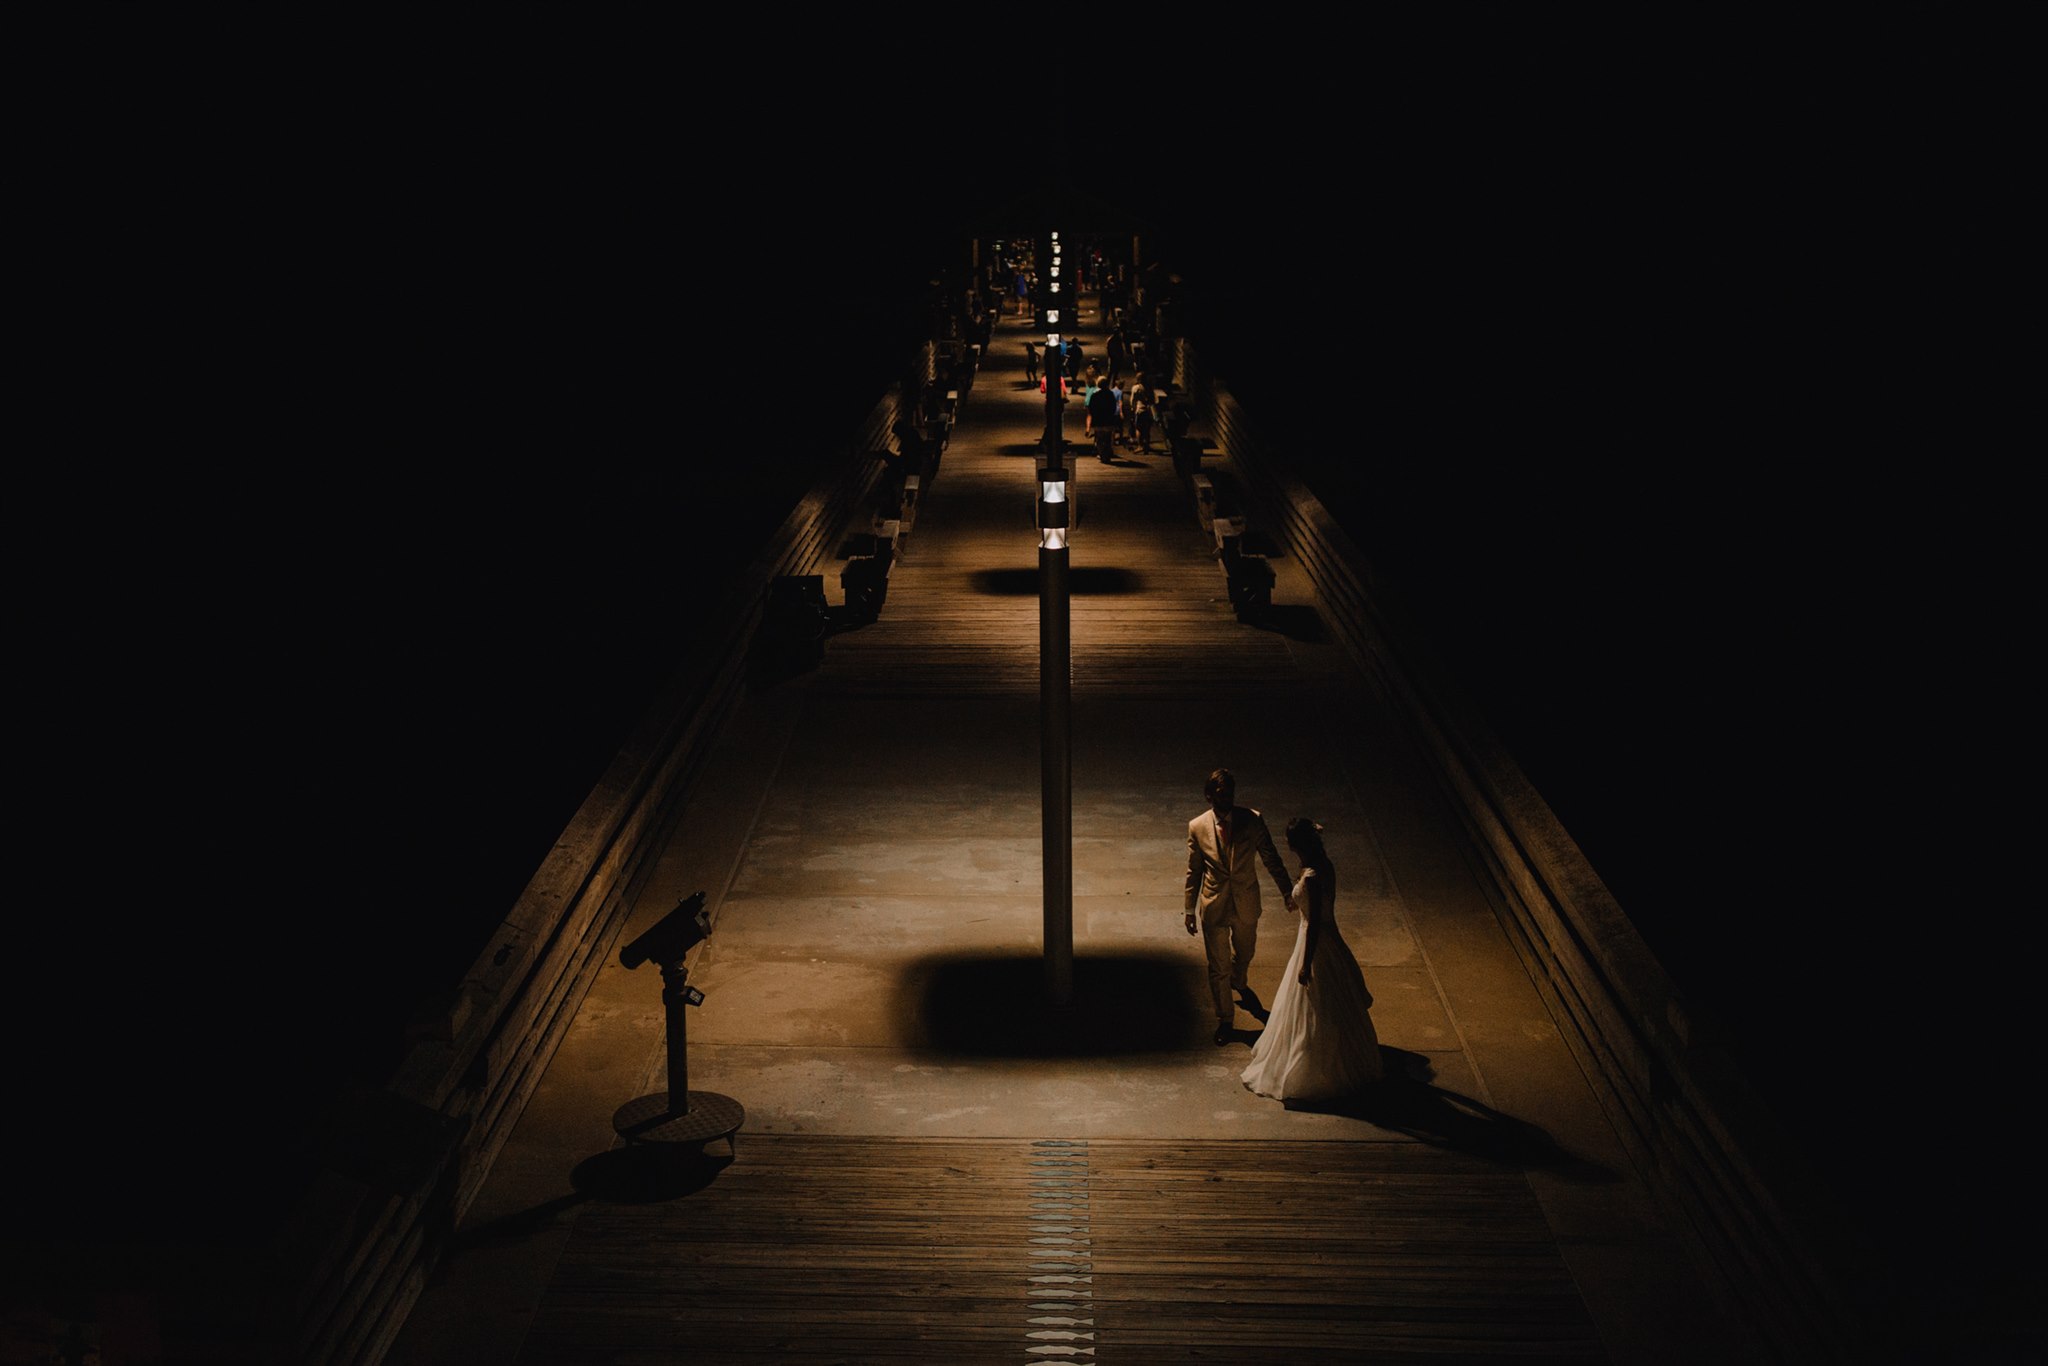 A wedding couple walk along a dimly lit pier at night. Photo by The Commoneer.